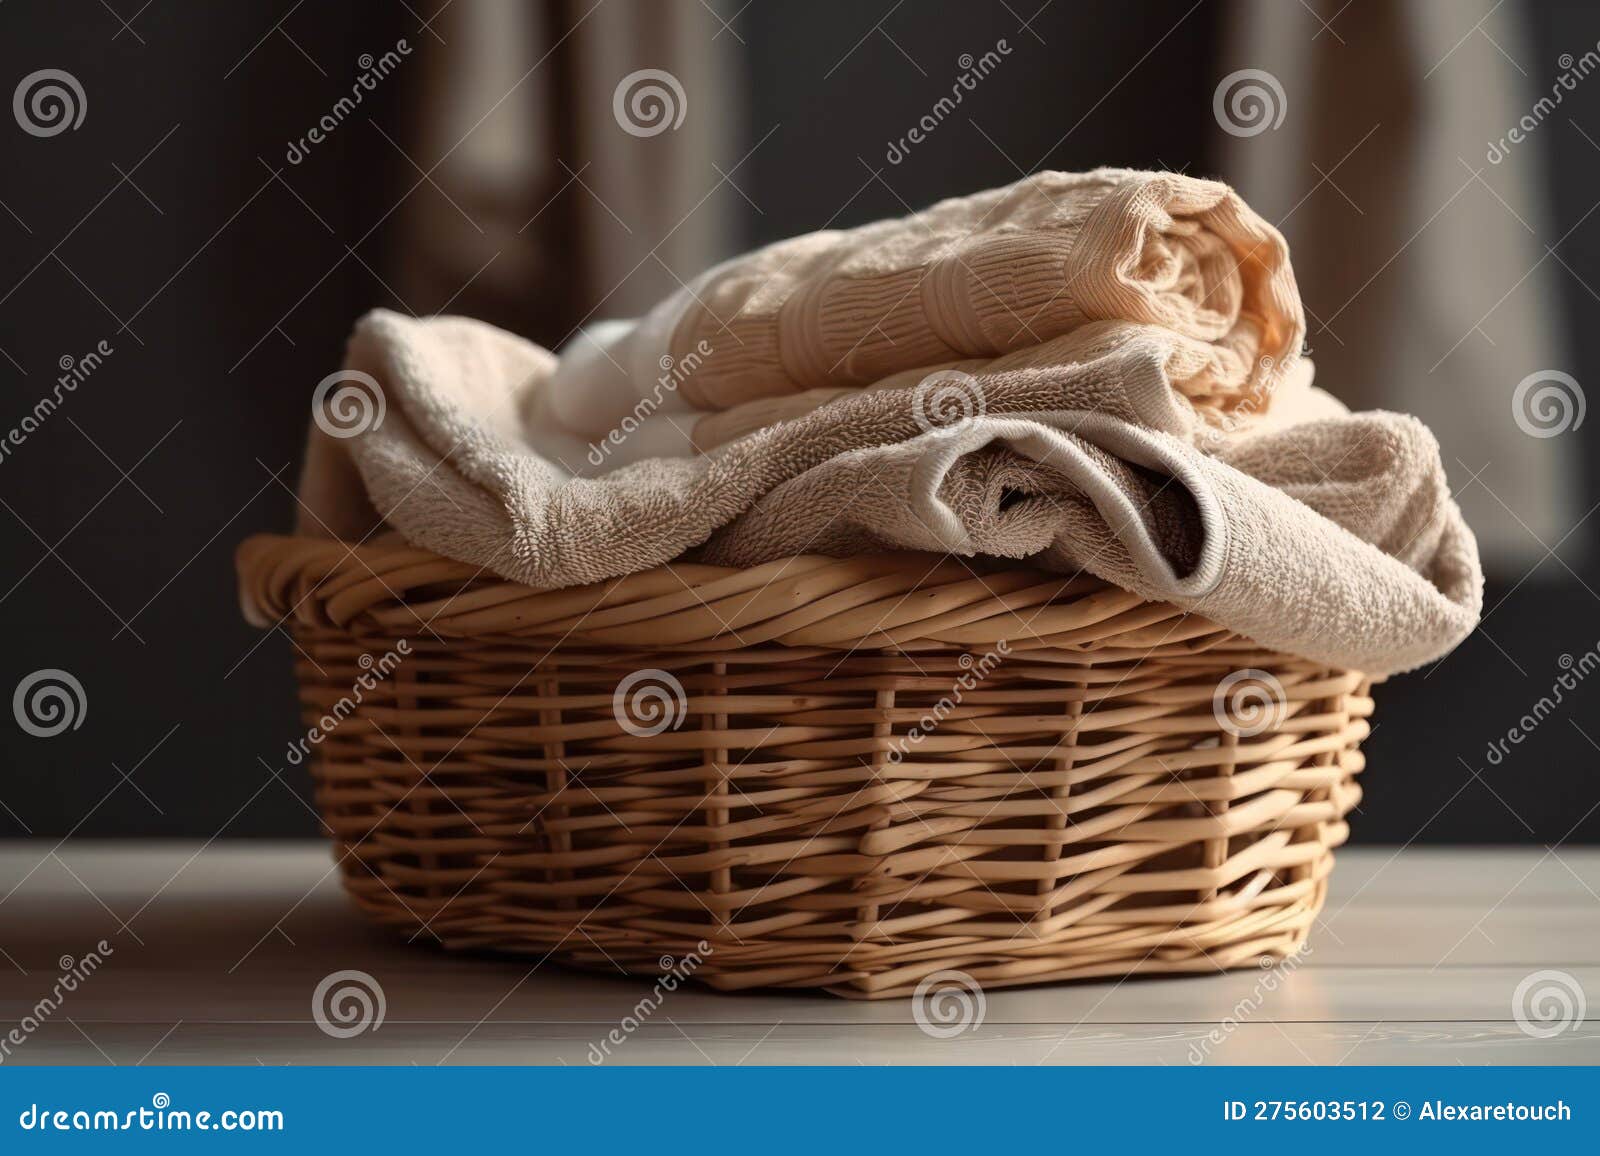 wicker basket with washed dry linen close-up. washday